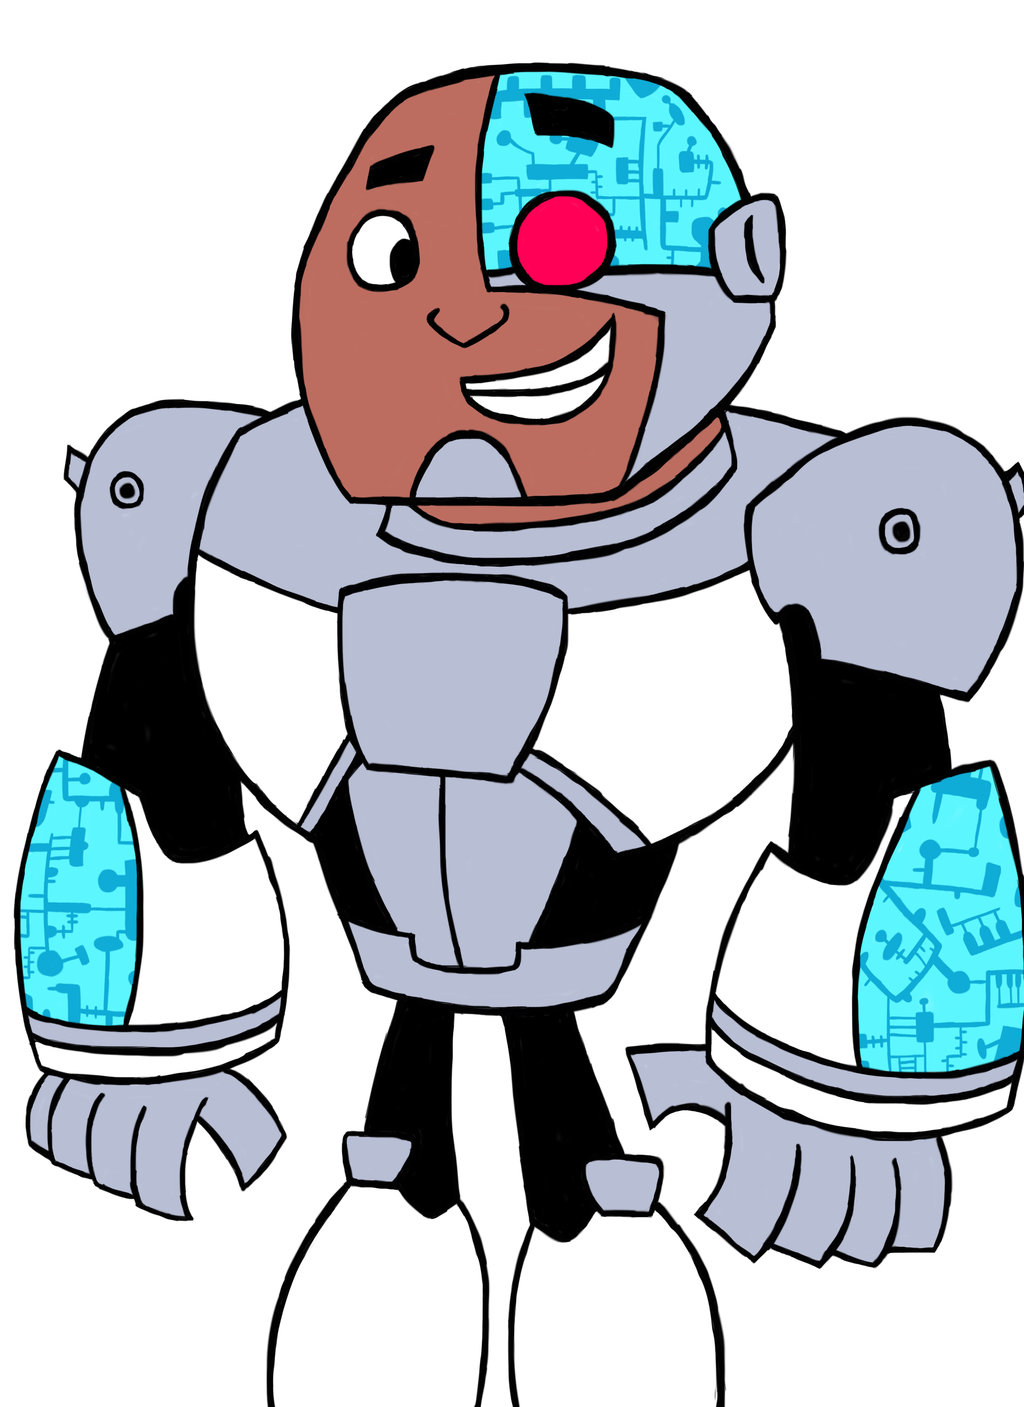 Teen Titans GO Cyborg with color by JulianGutierrez on